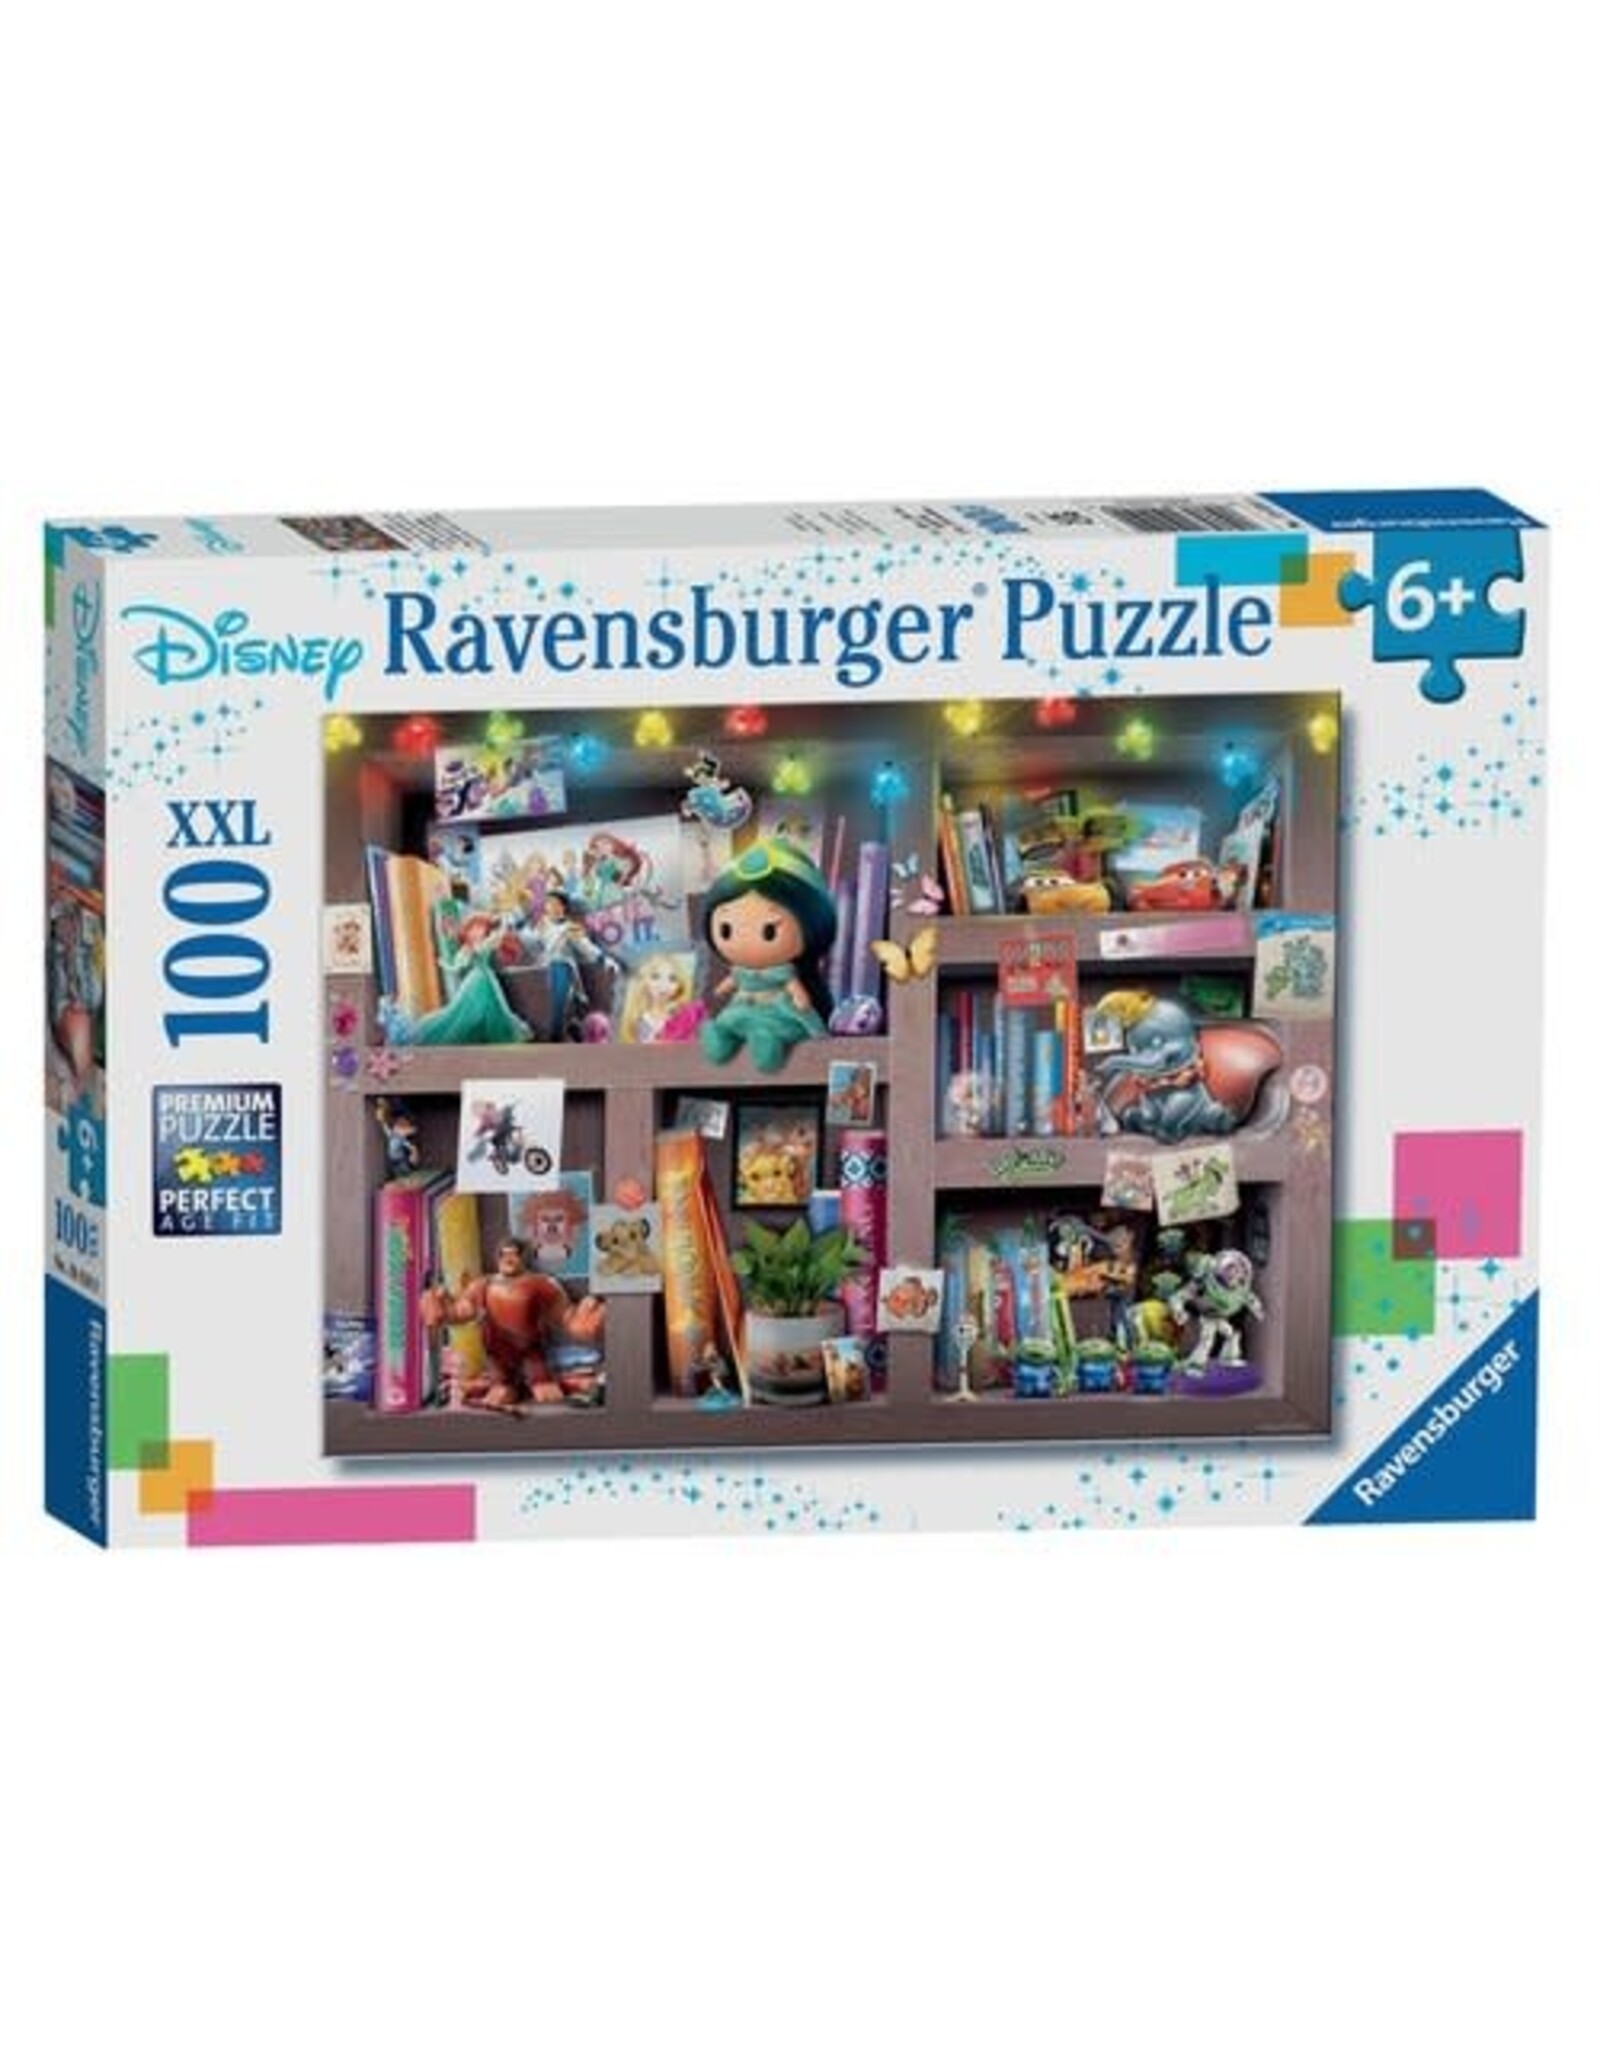 Ravensburger Disney The Collector's Display 100pc